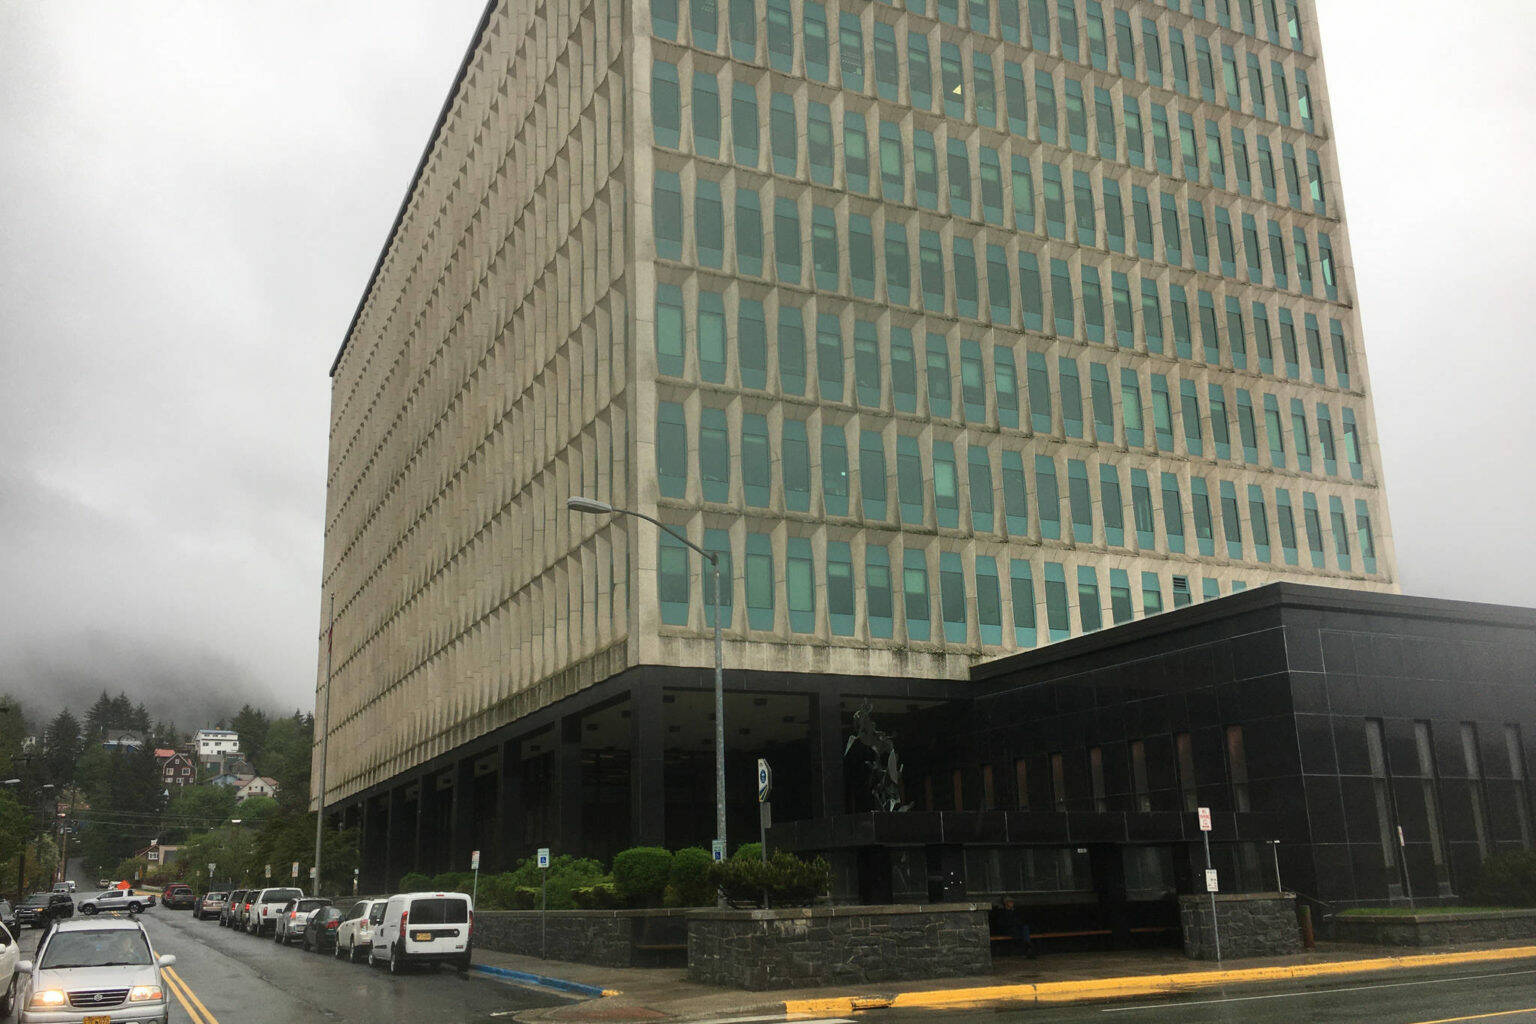 A man arrested Juneau in 2019 was sentenced to six years in prison United States District Court at the Hurff A. Saunders Federal Building. (Michael S. Lockett / Juneau Empire File)